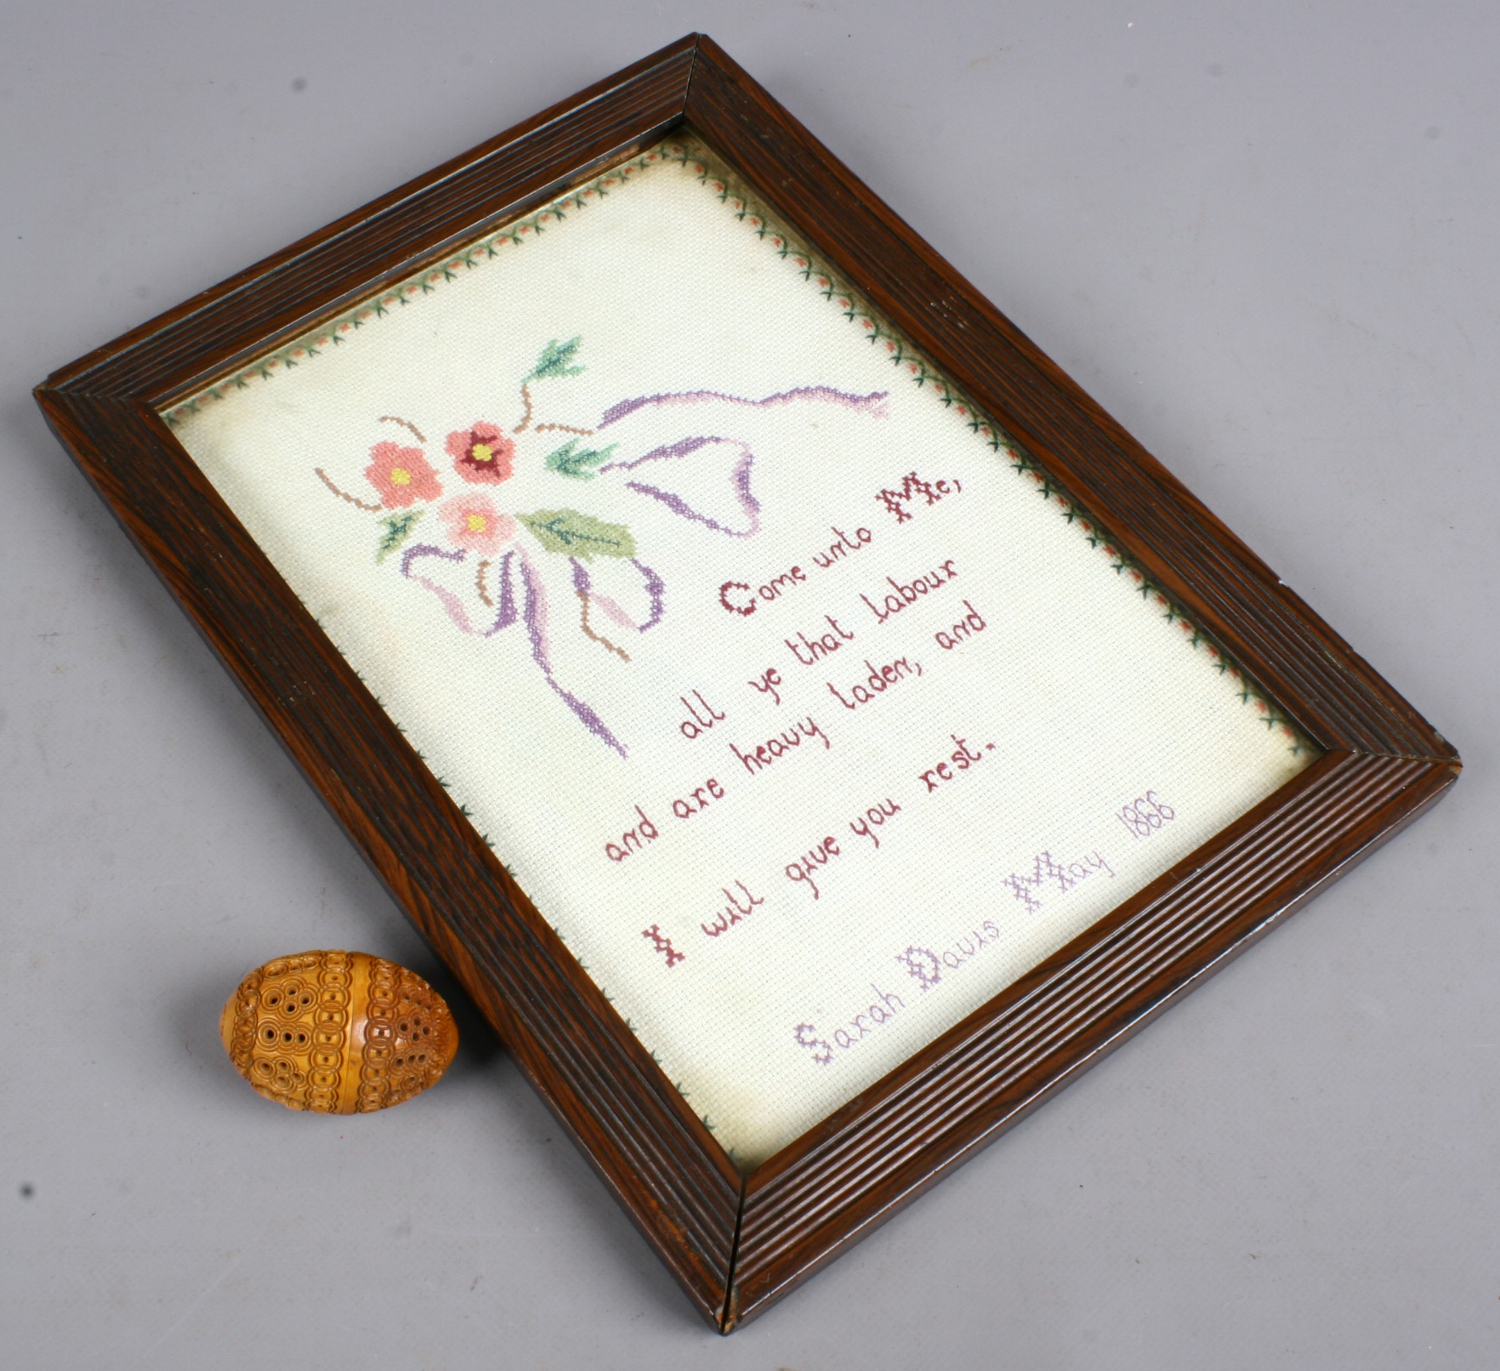 A framed Victorian sampler by Sarah Davis, dated May 1866 along with a carved and pierced treen egg.